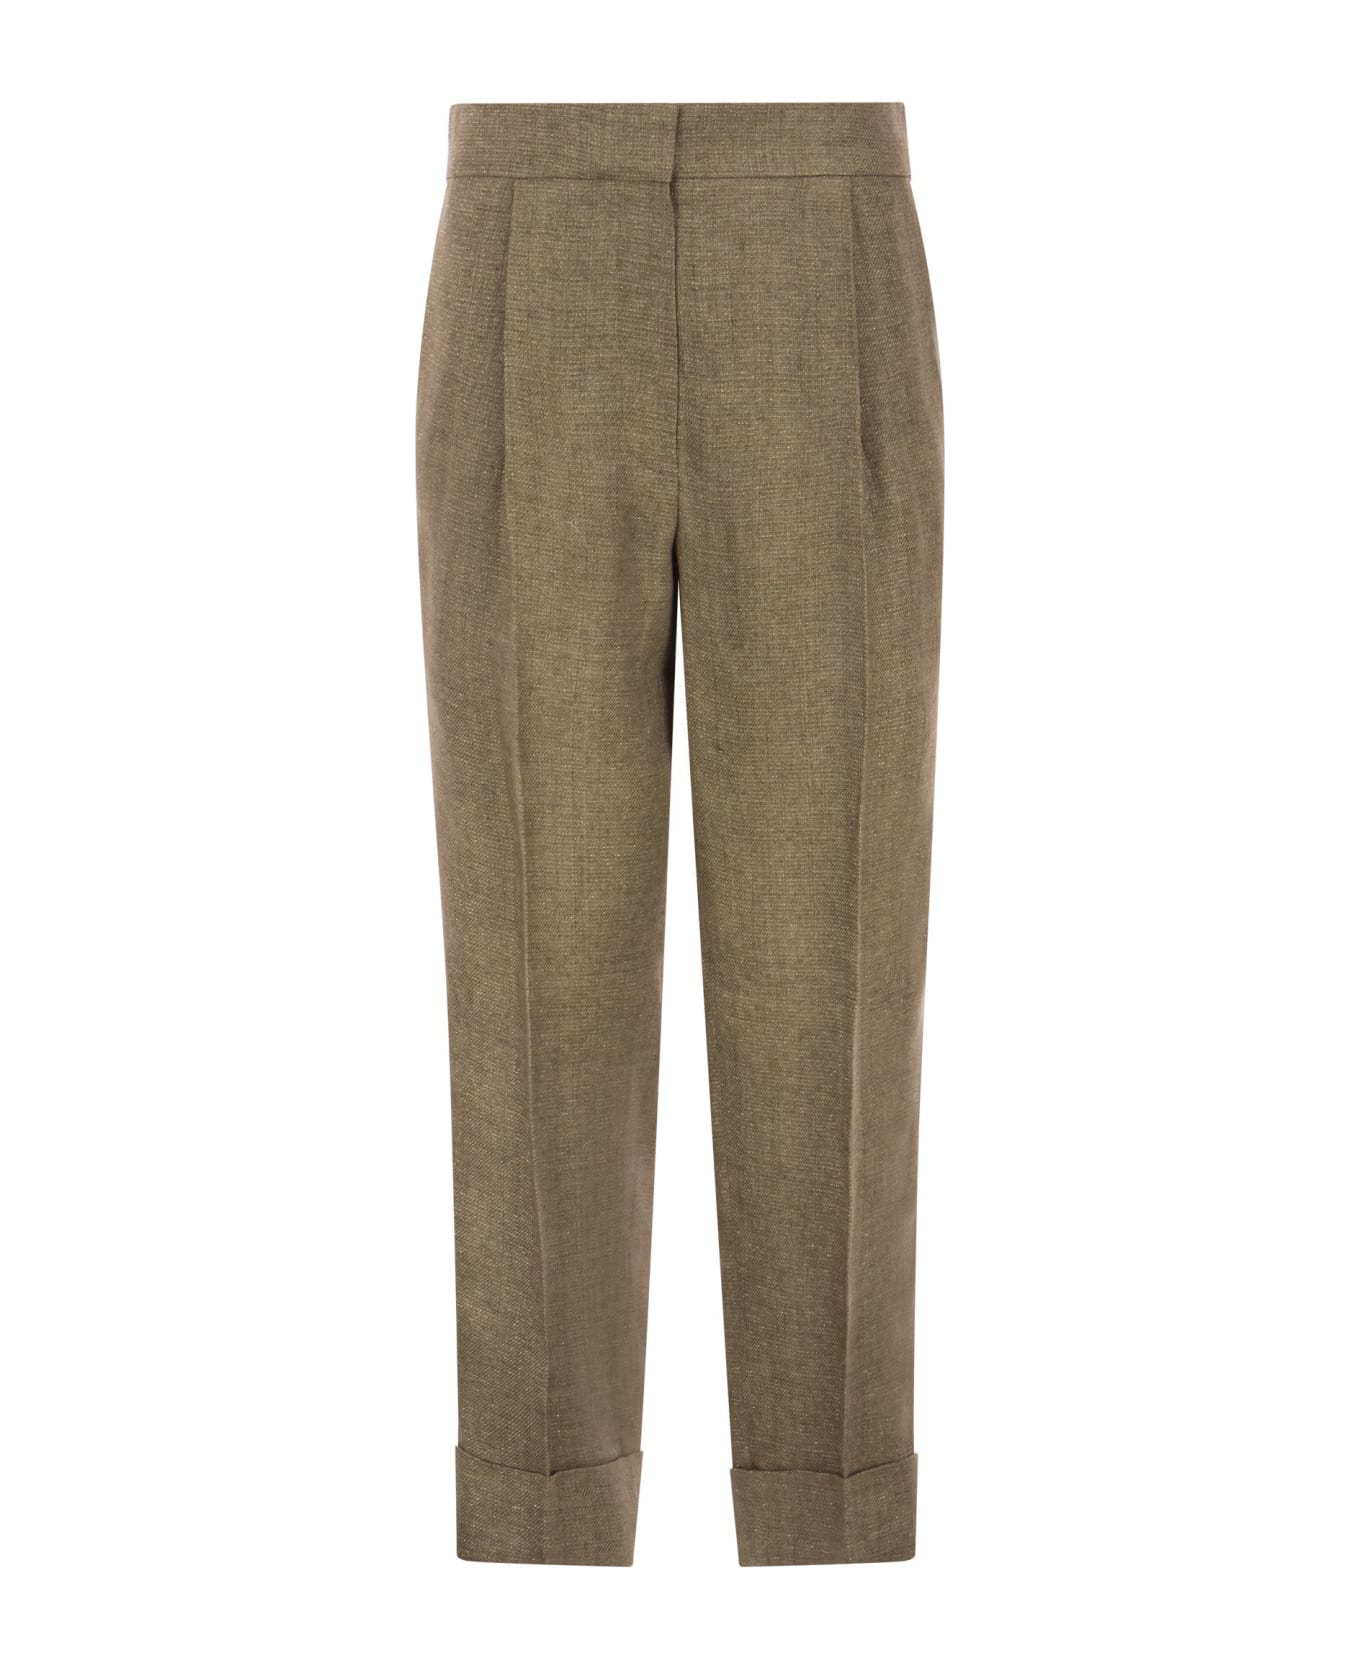 Brunello Cucinelli Relaxed Sartorial Trousers - CAMEL/ORO